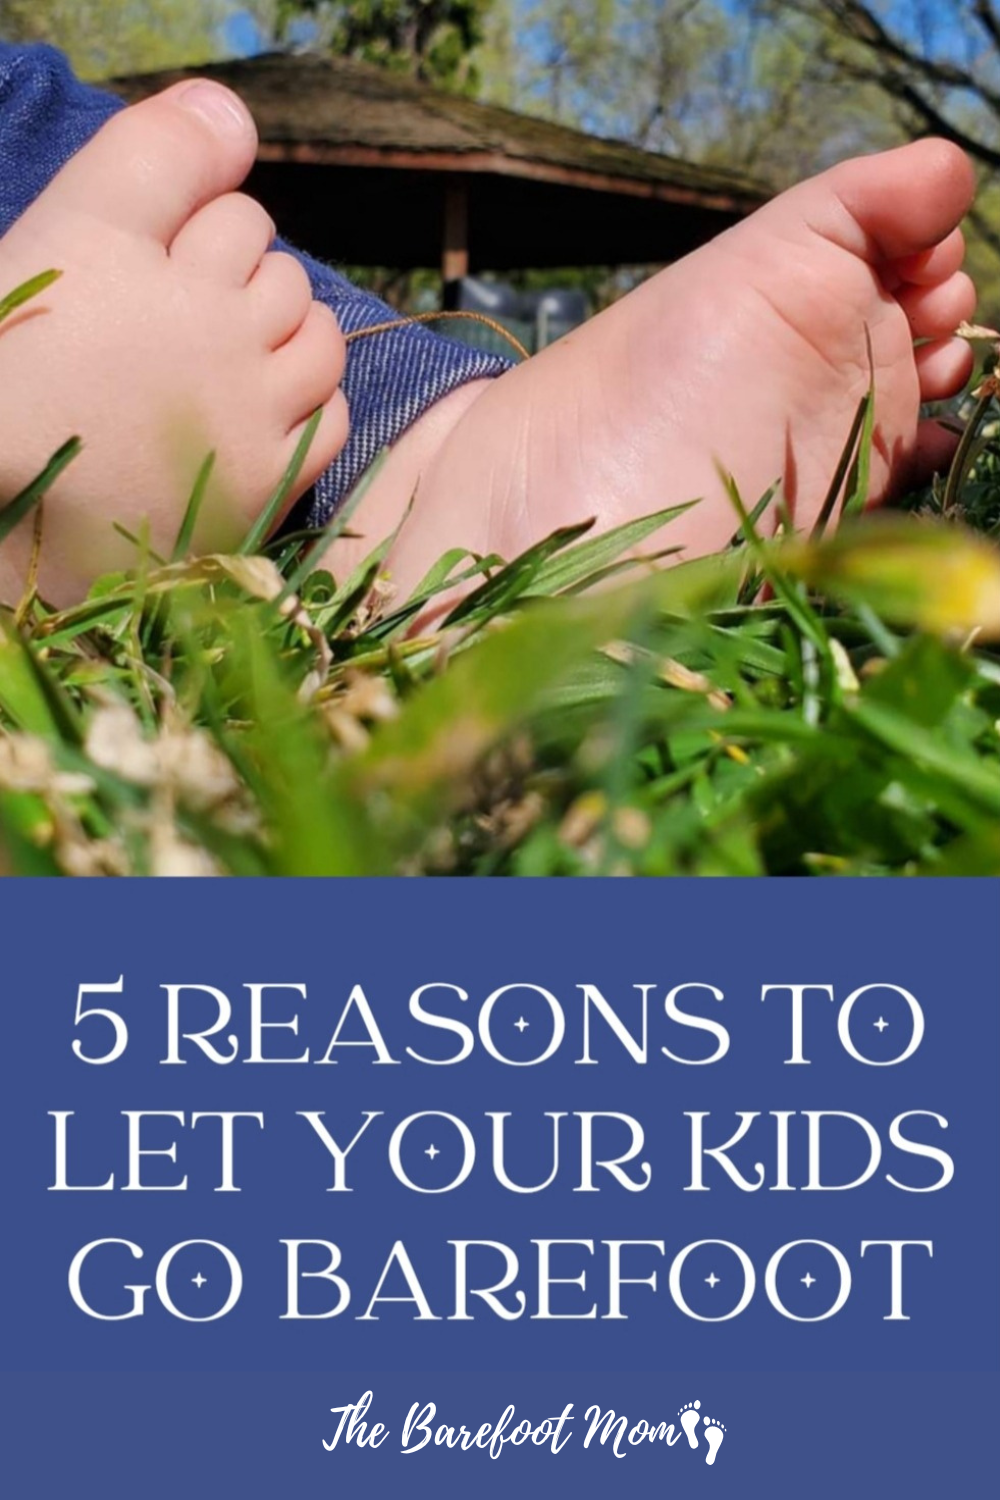 Why you should let your kids go barefoot